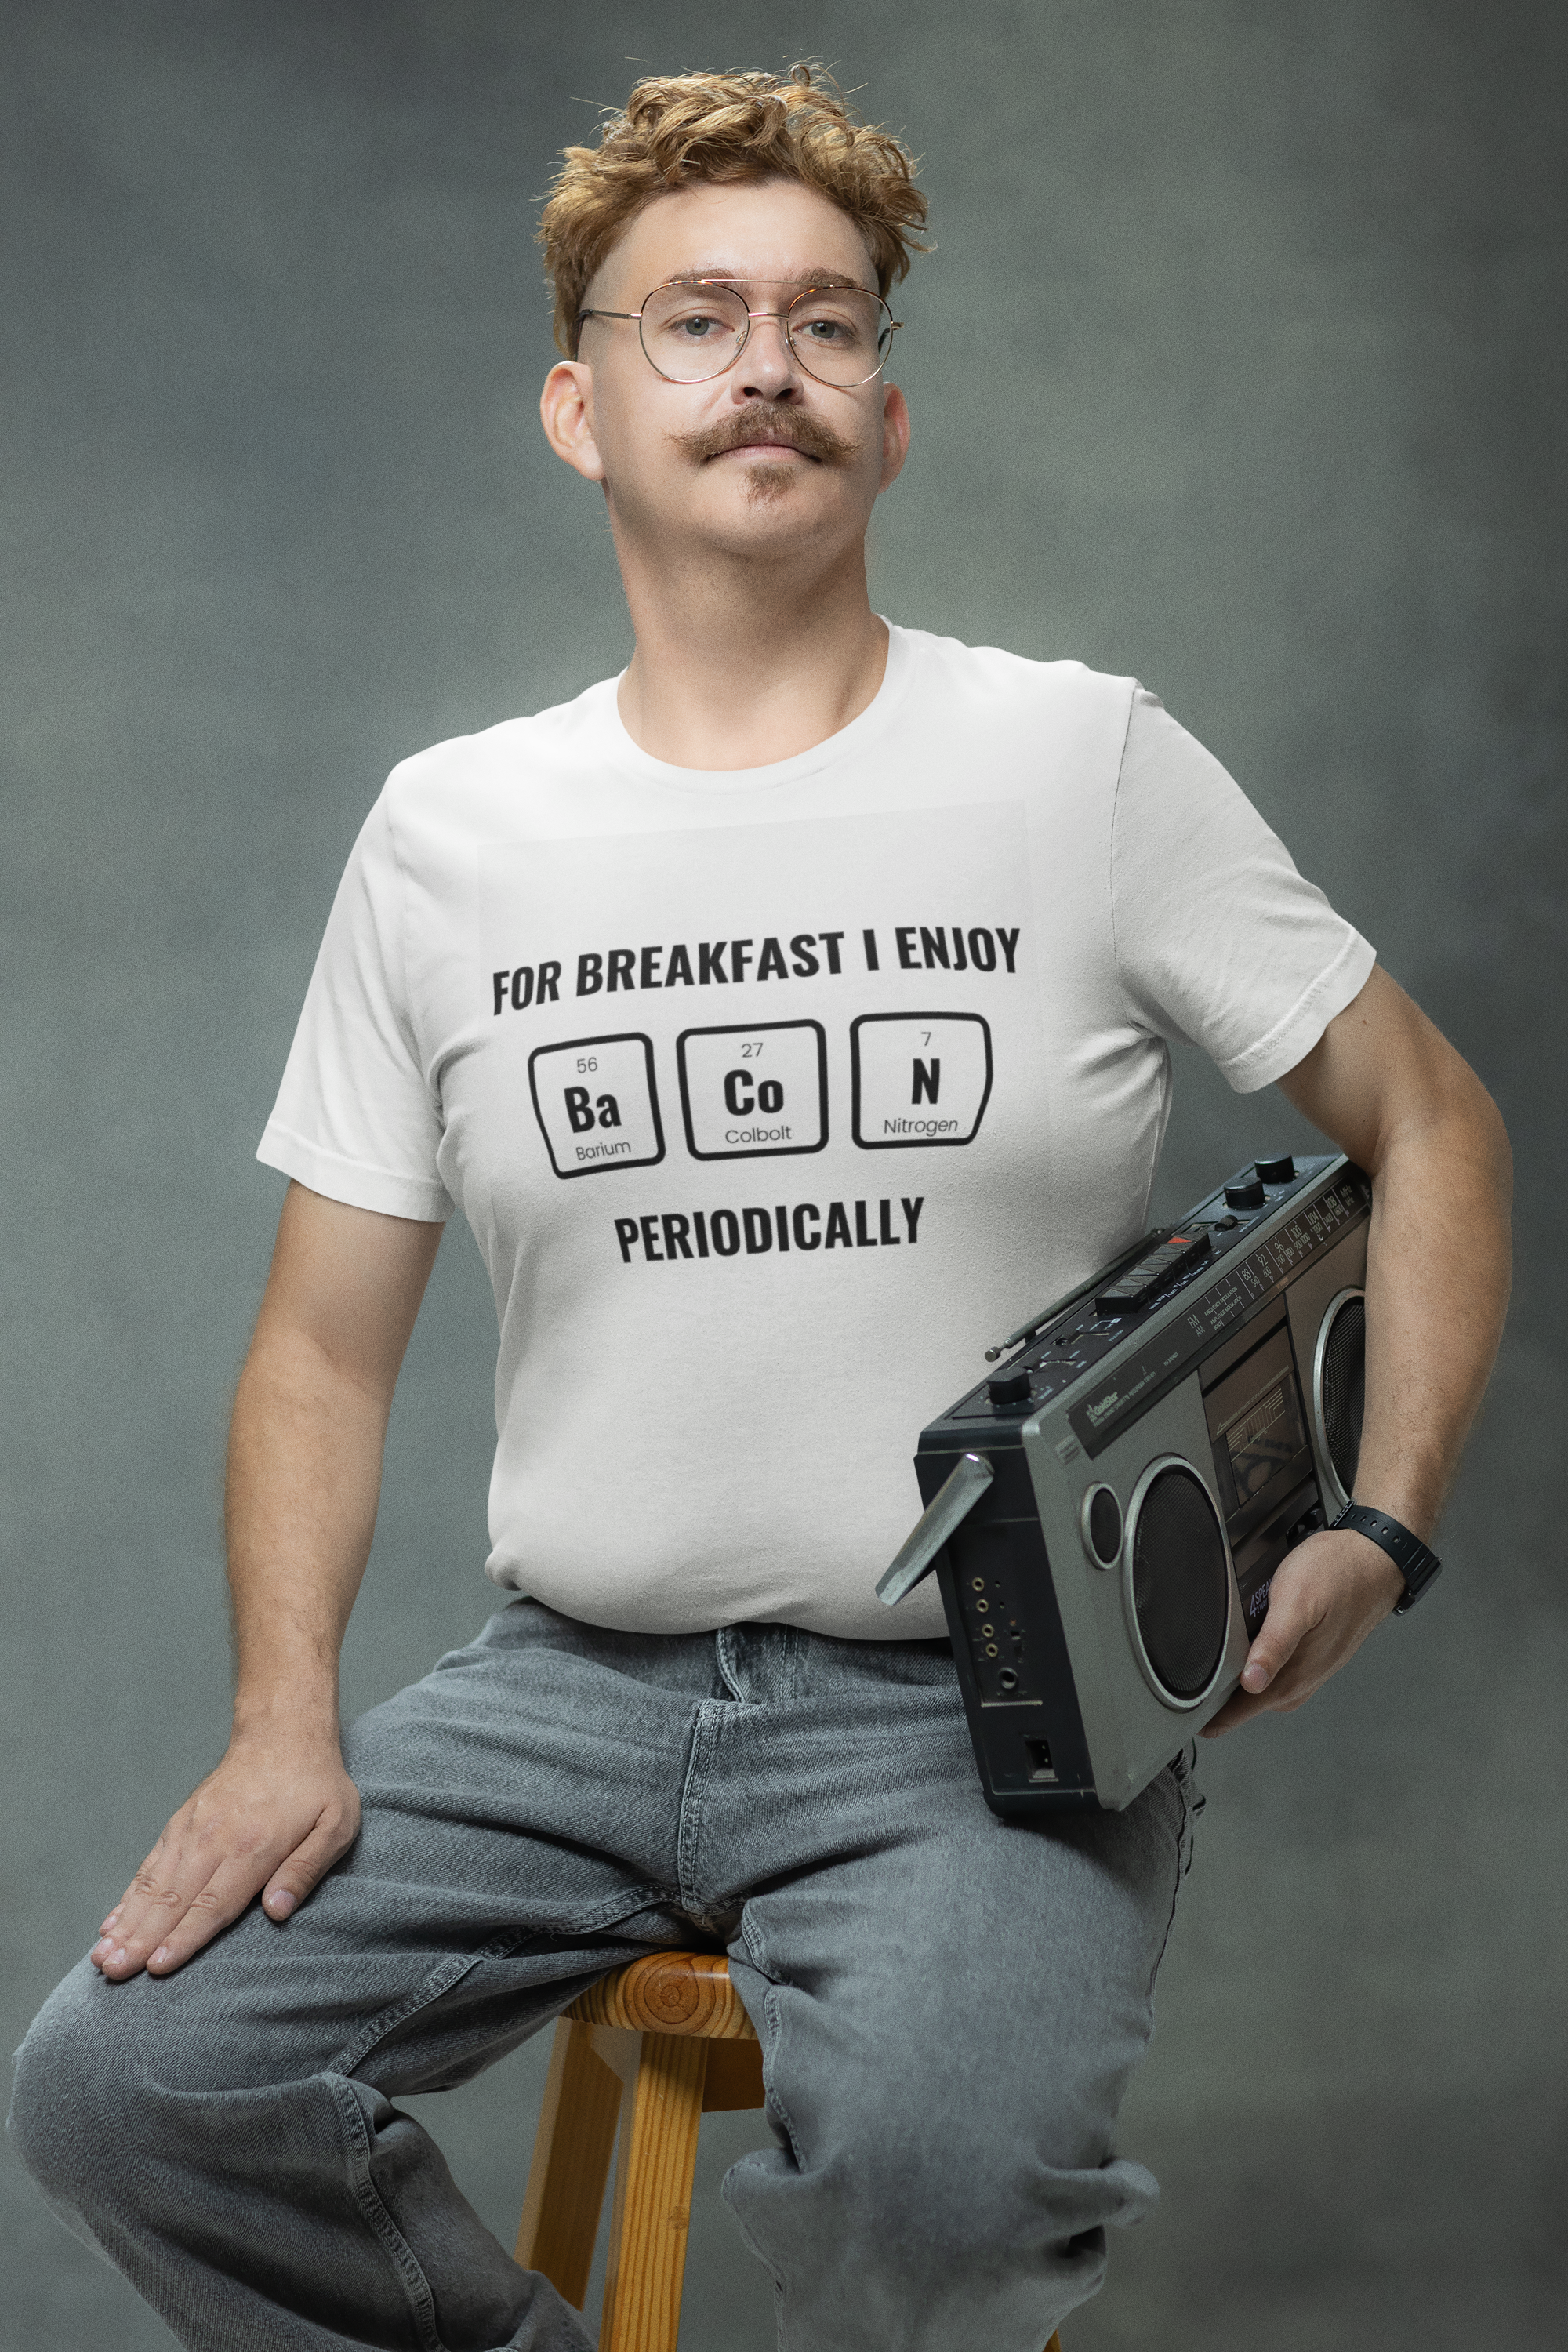 Introducing the "For Breakfast, I Enjoy Bacon, Periodically" Funny Periodic Table Unisex Cut &amp; Sew Tee (AOP), where science humor and culinary delights collide. This tee is a must-have for bacon lovers, chemistry enthusiasts, and anyone who enjoys starting their day with a laugh.